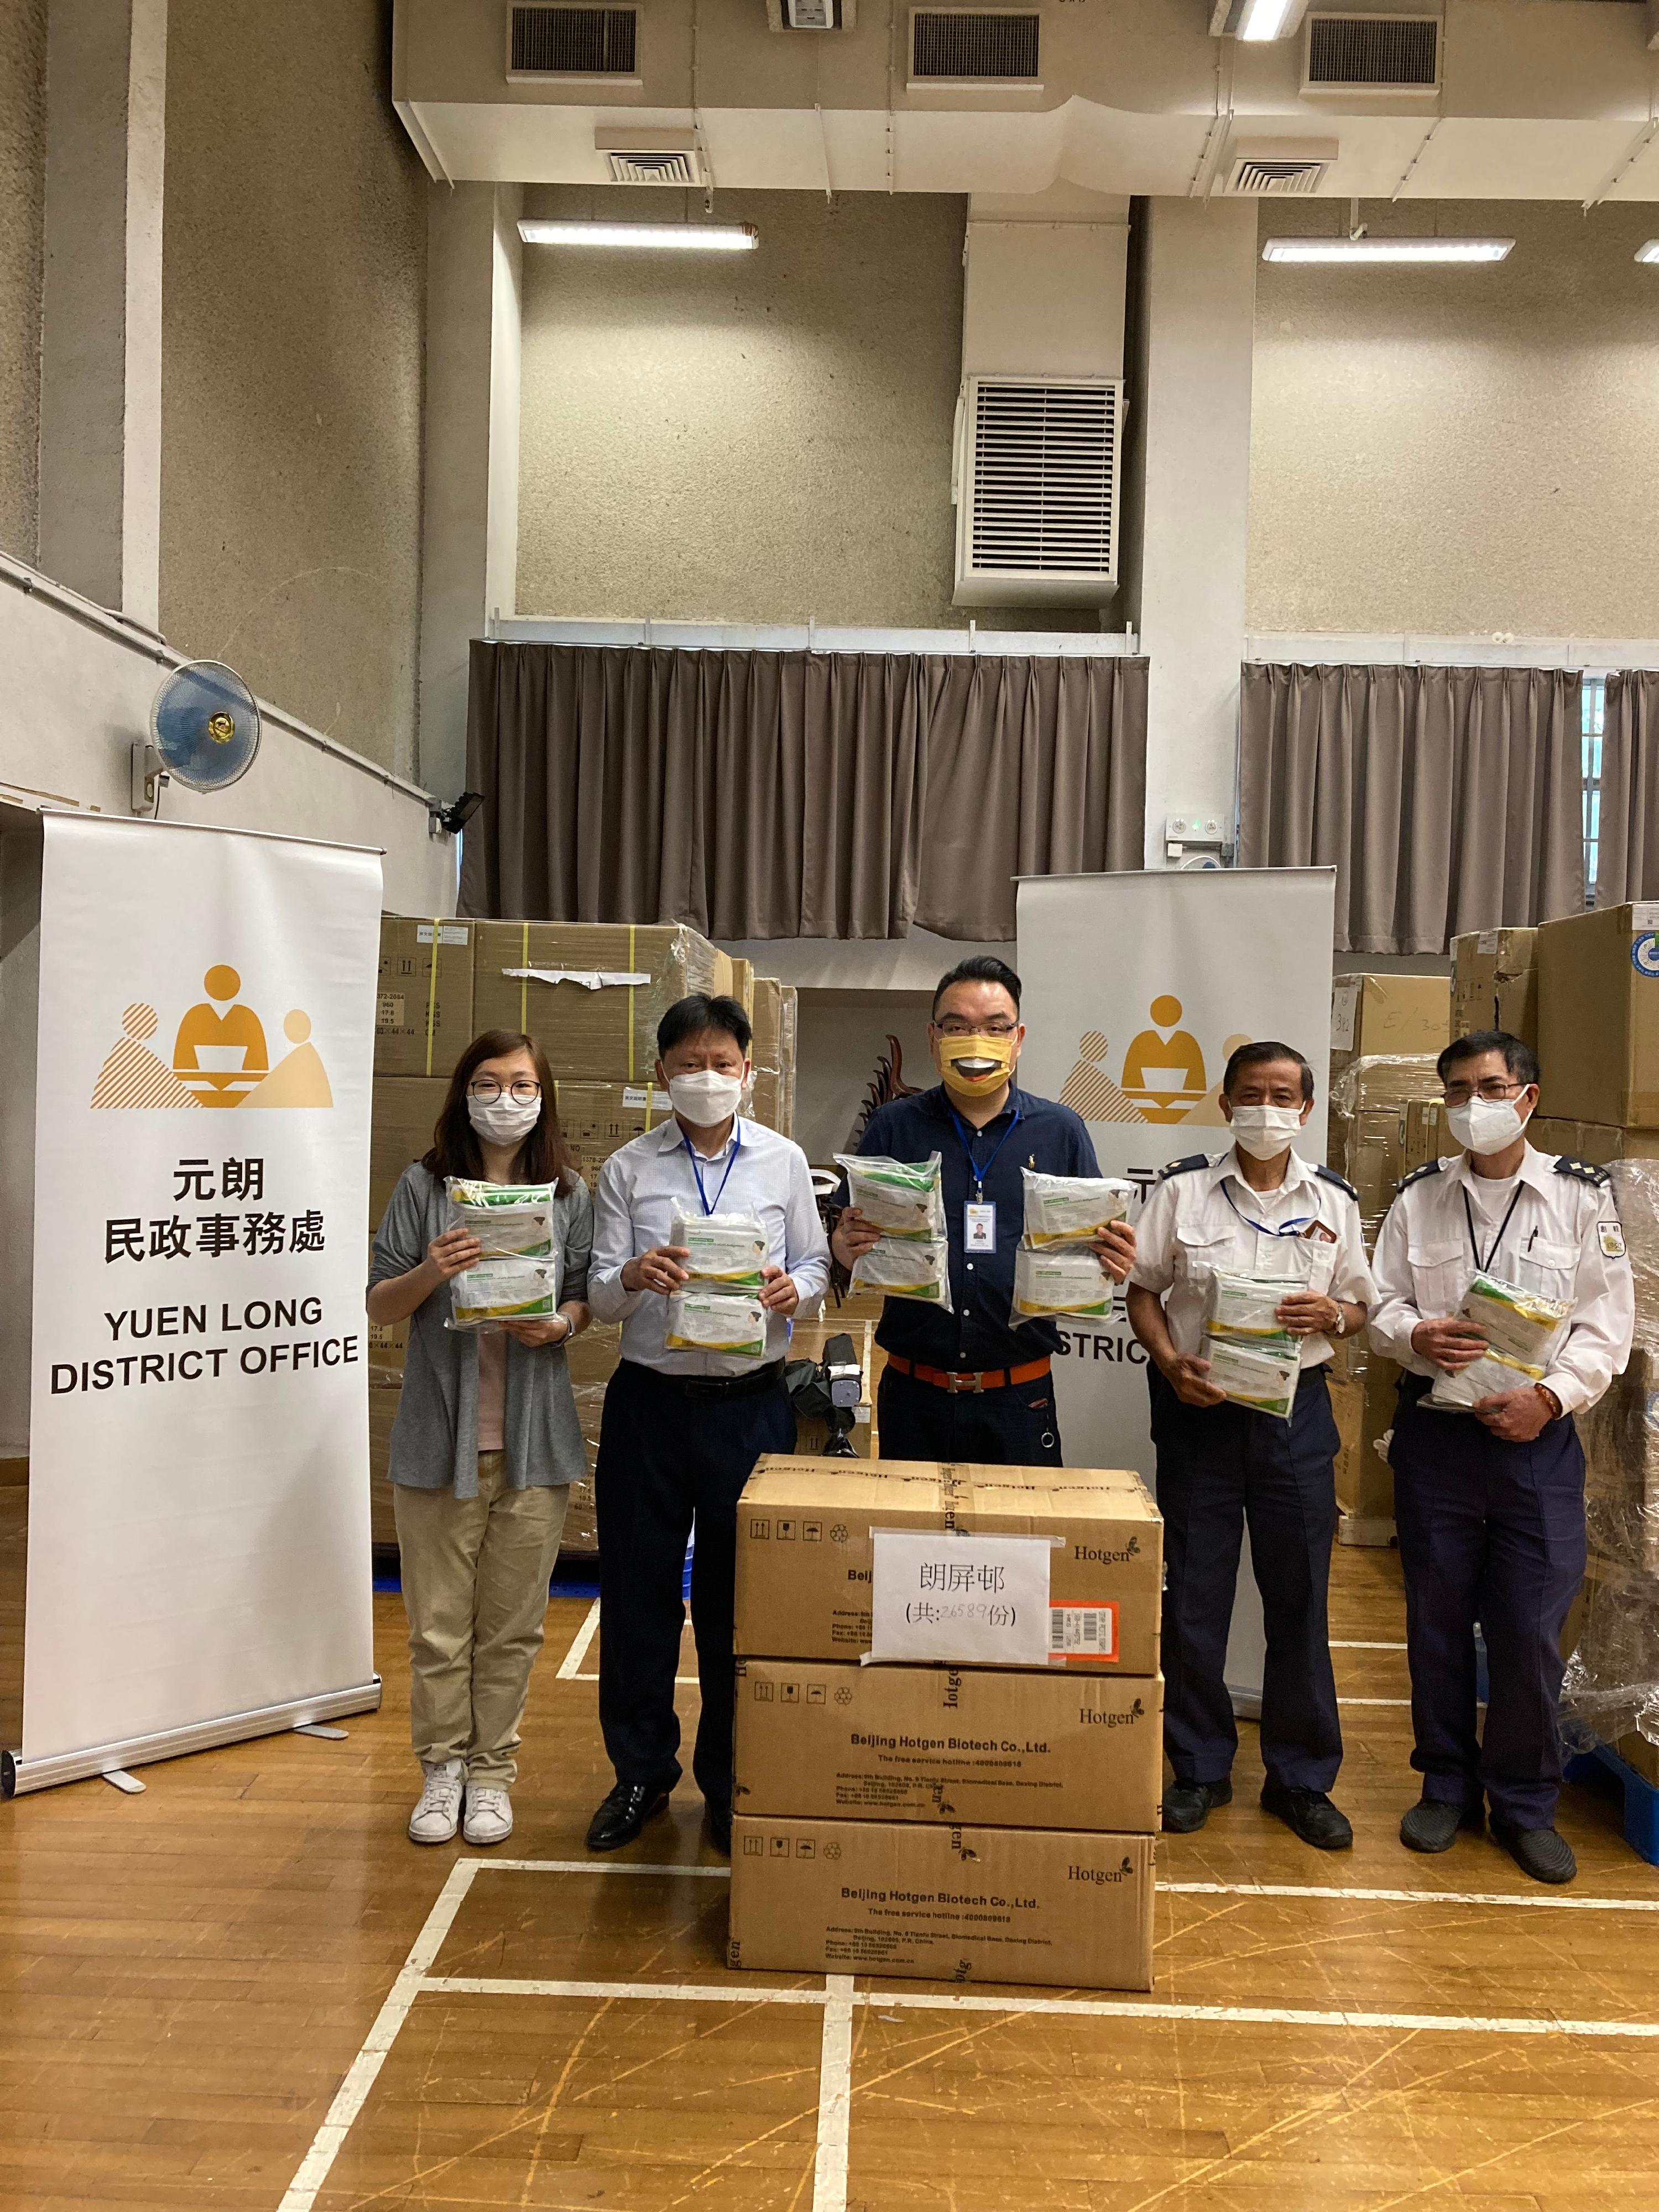 The Yuen Long District Office today (May 3) distributed COVID-19 rapid test kits to households, cleansing workers and property management staff living and working in Long Ping Estate for voluntary testing through the property management company.